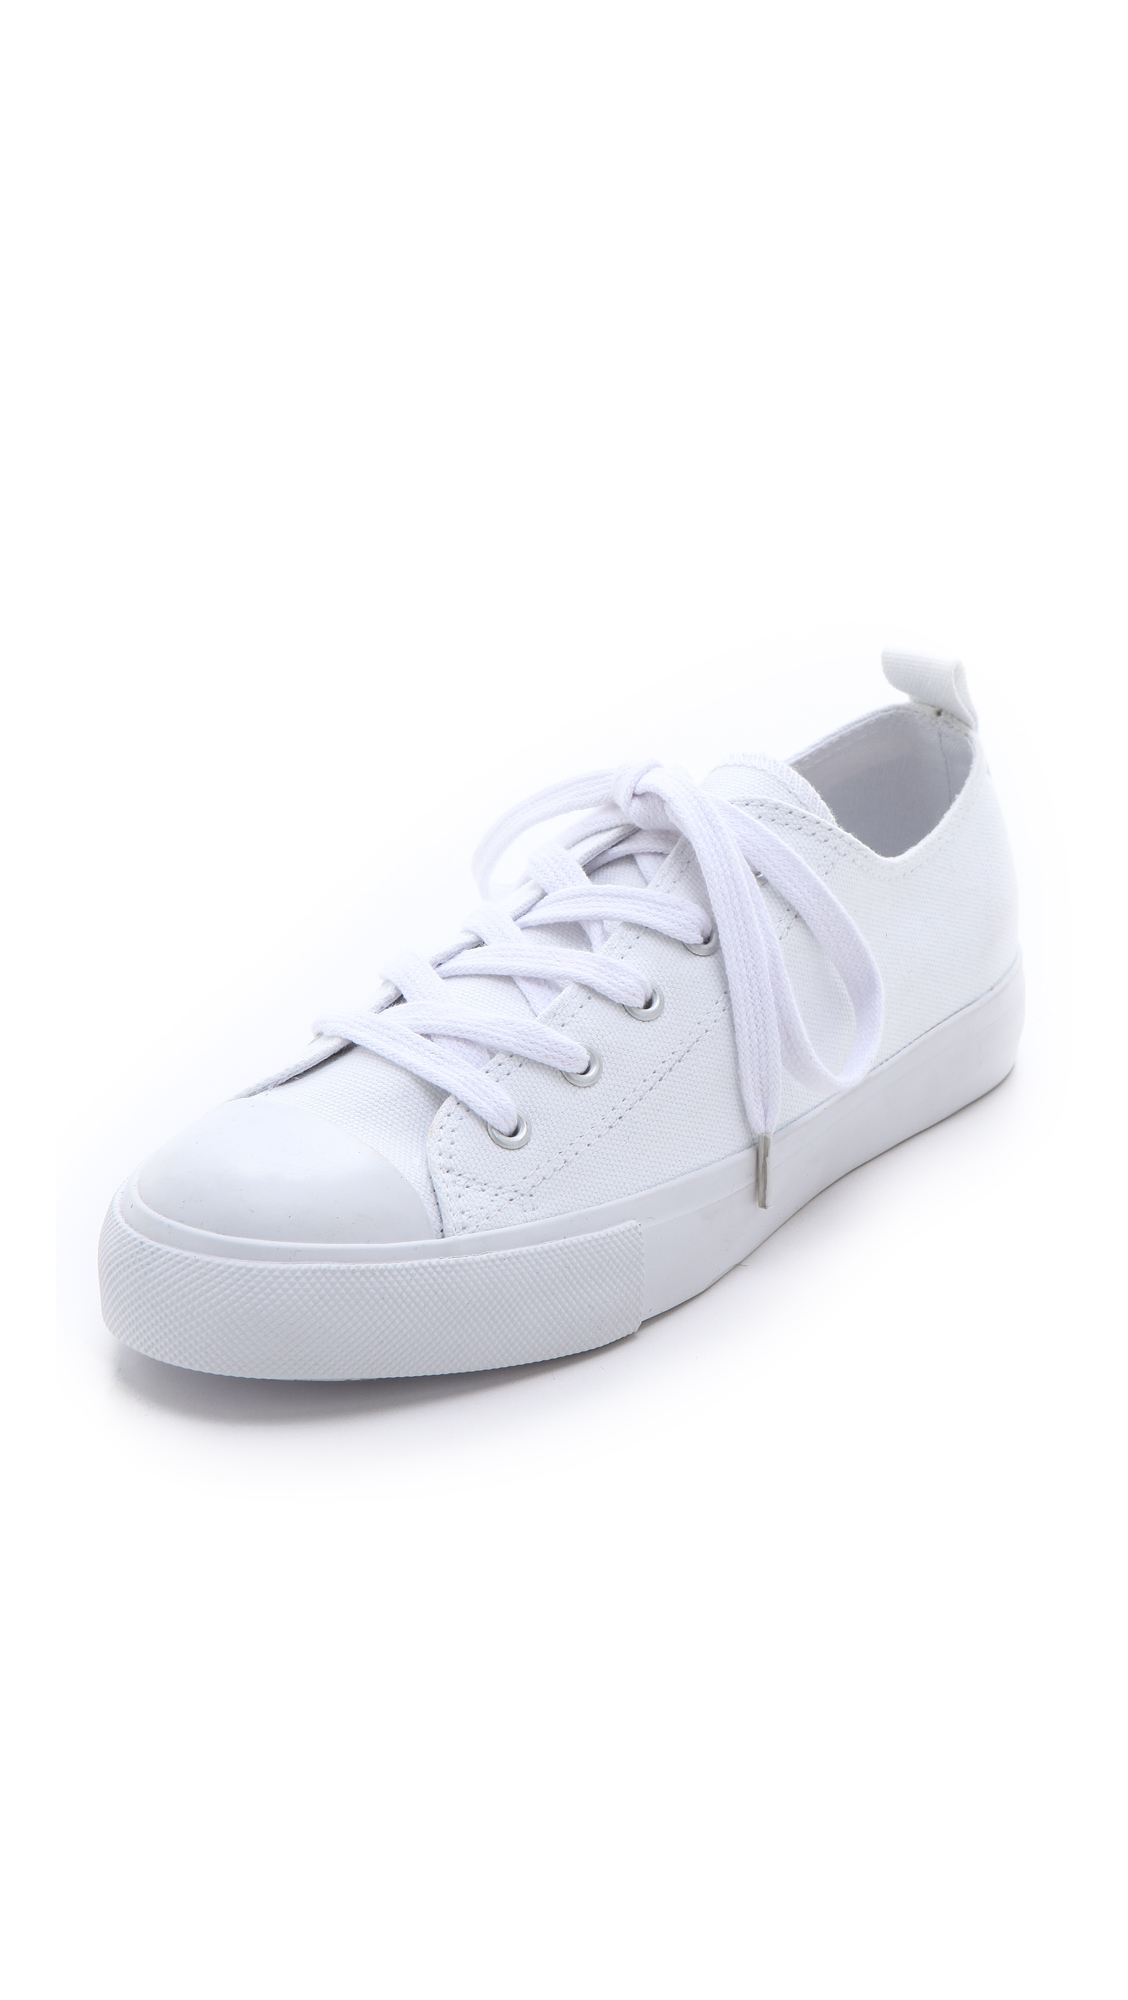 Lyst - Cheap Monday Base Low Top Sneakers in White